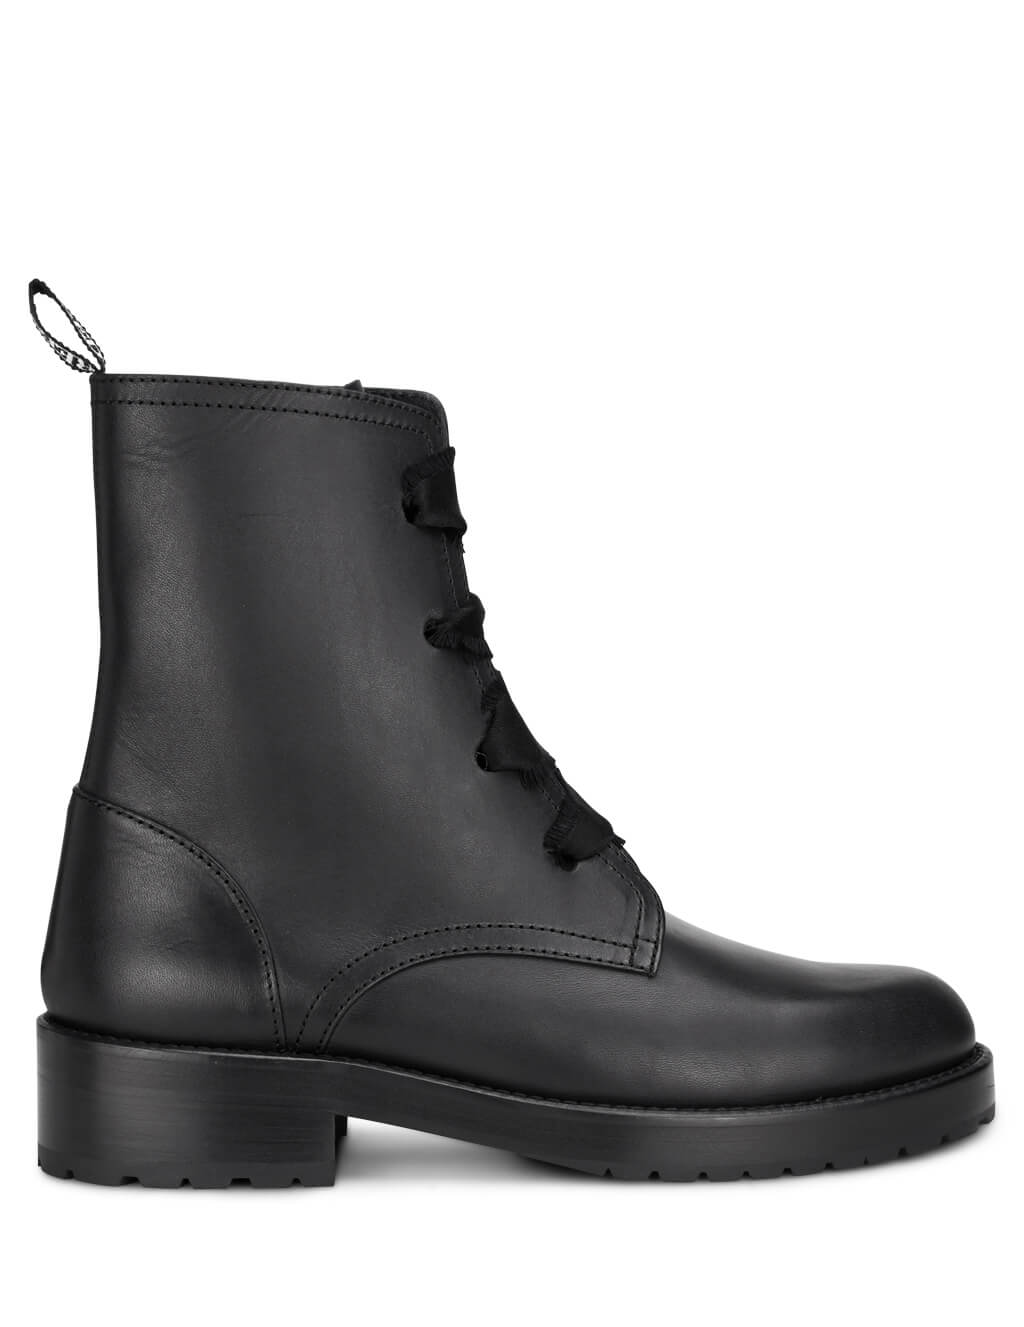 women's black army style boots